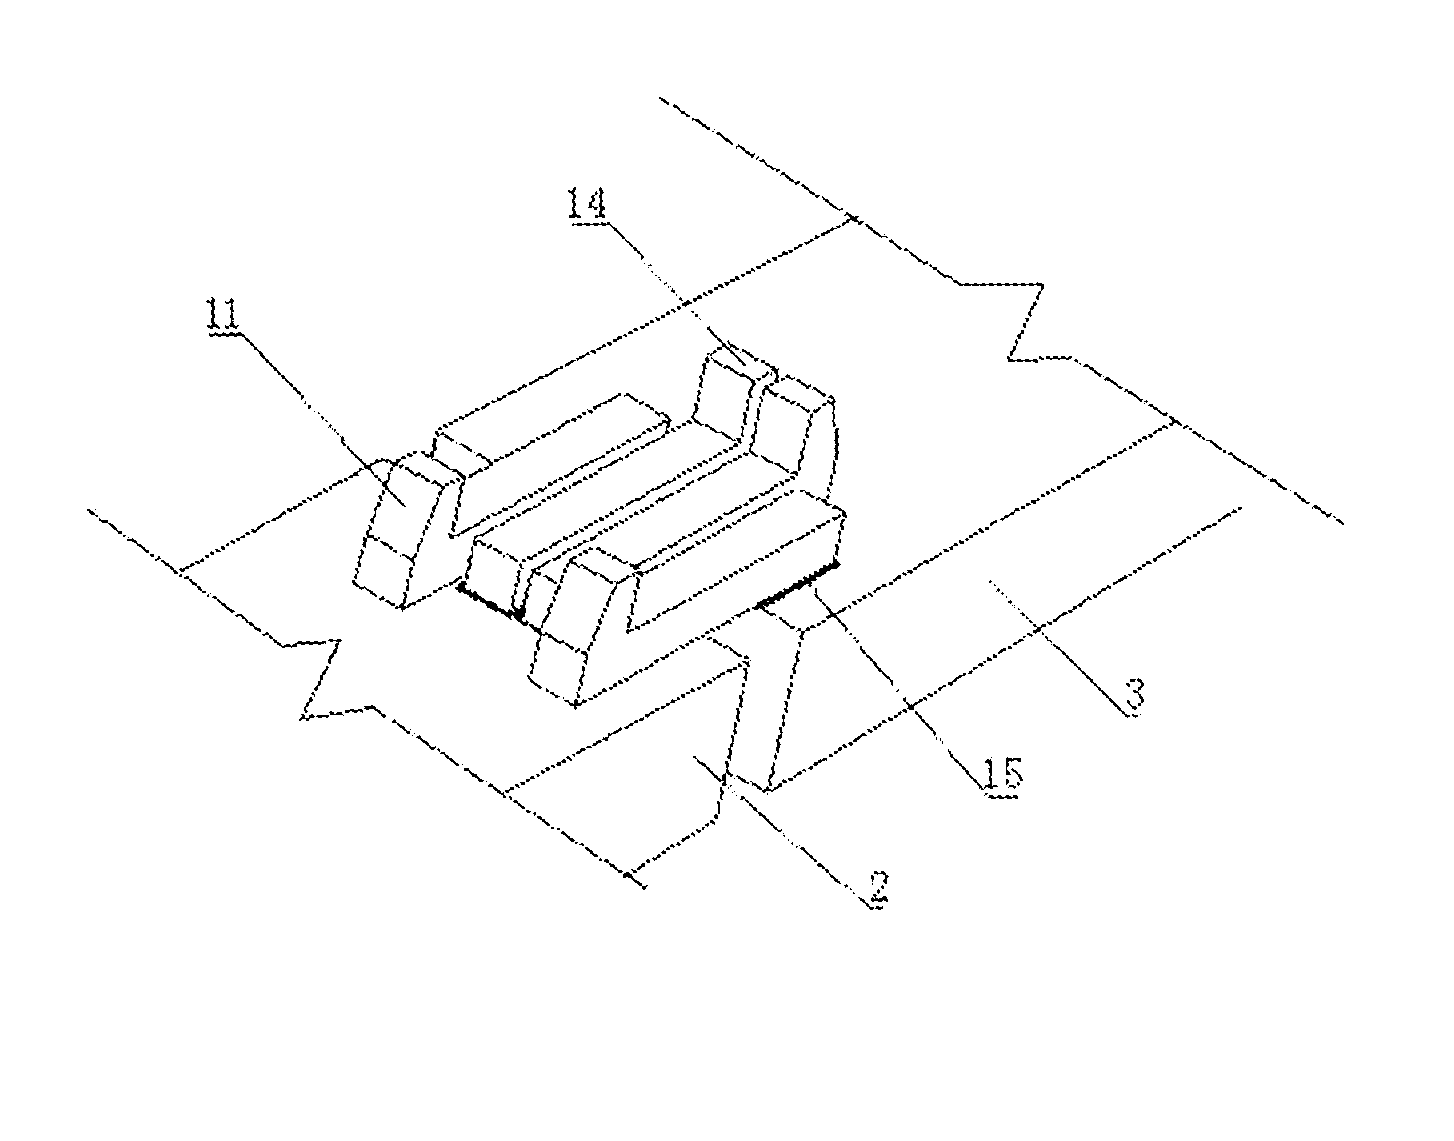 Apparatus and method for reverse rectification